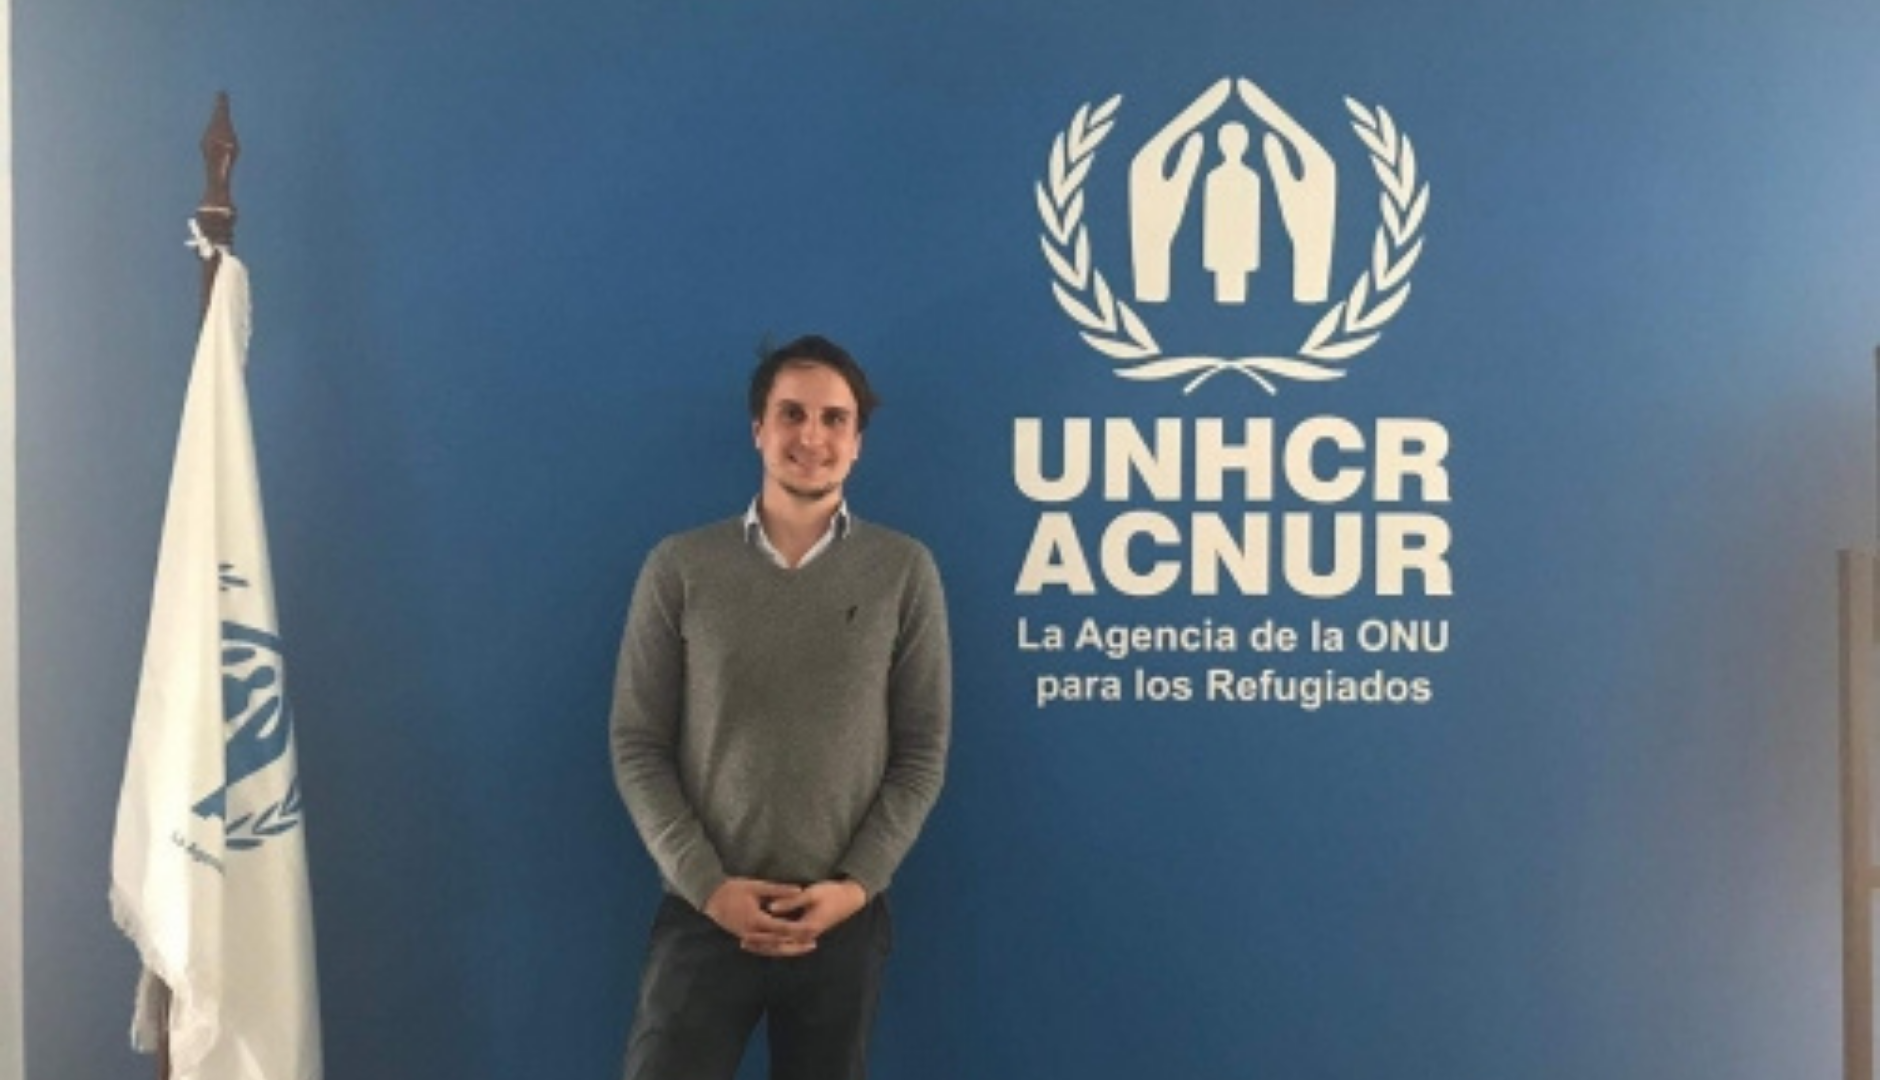 Arthur standing in front of the UNHCR logo